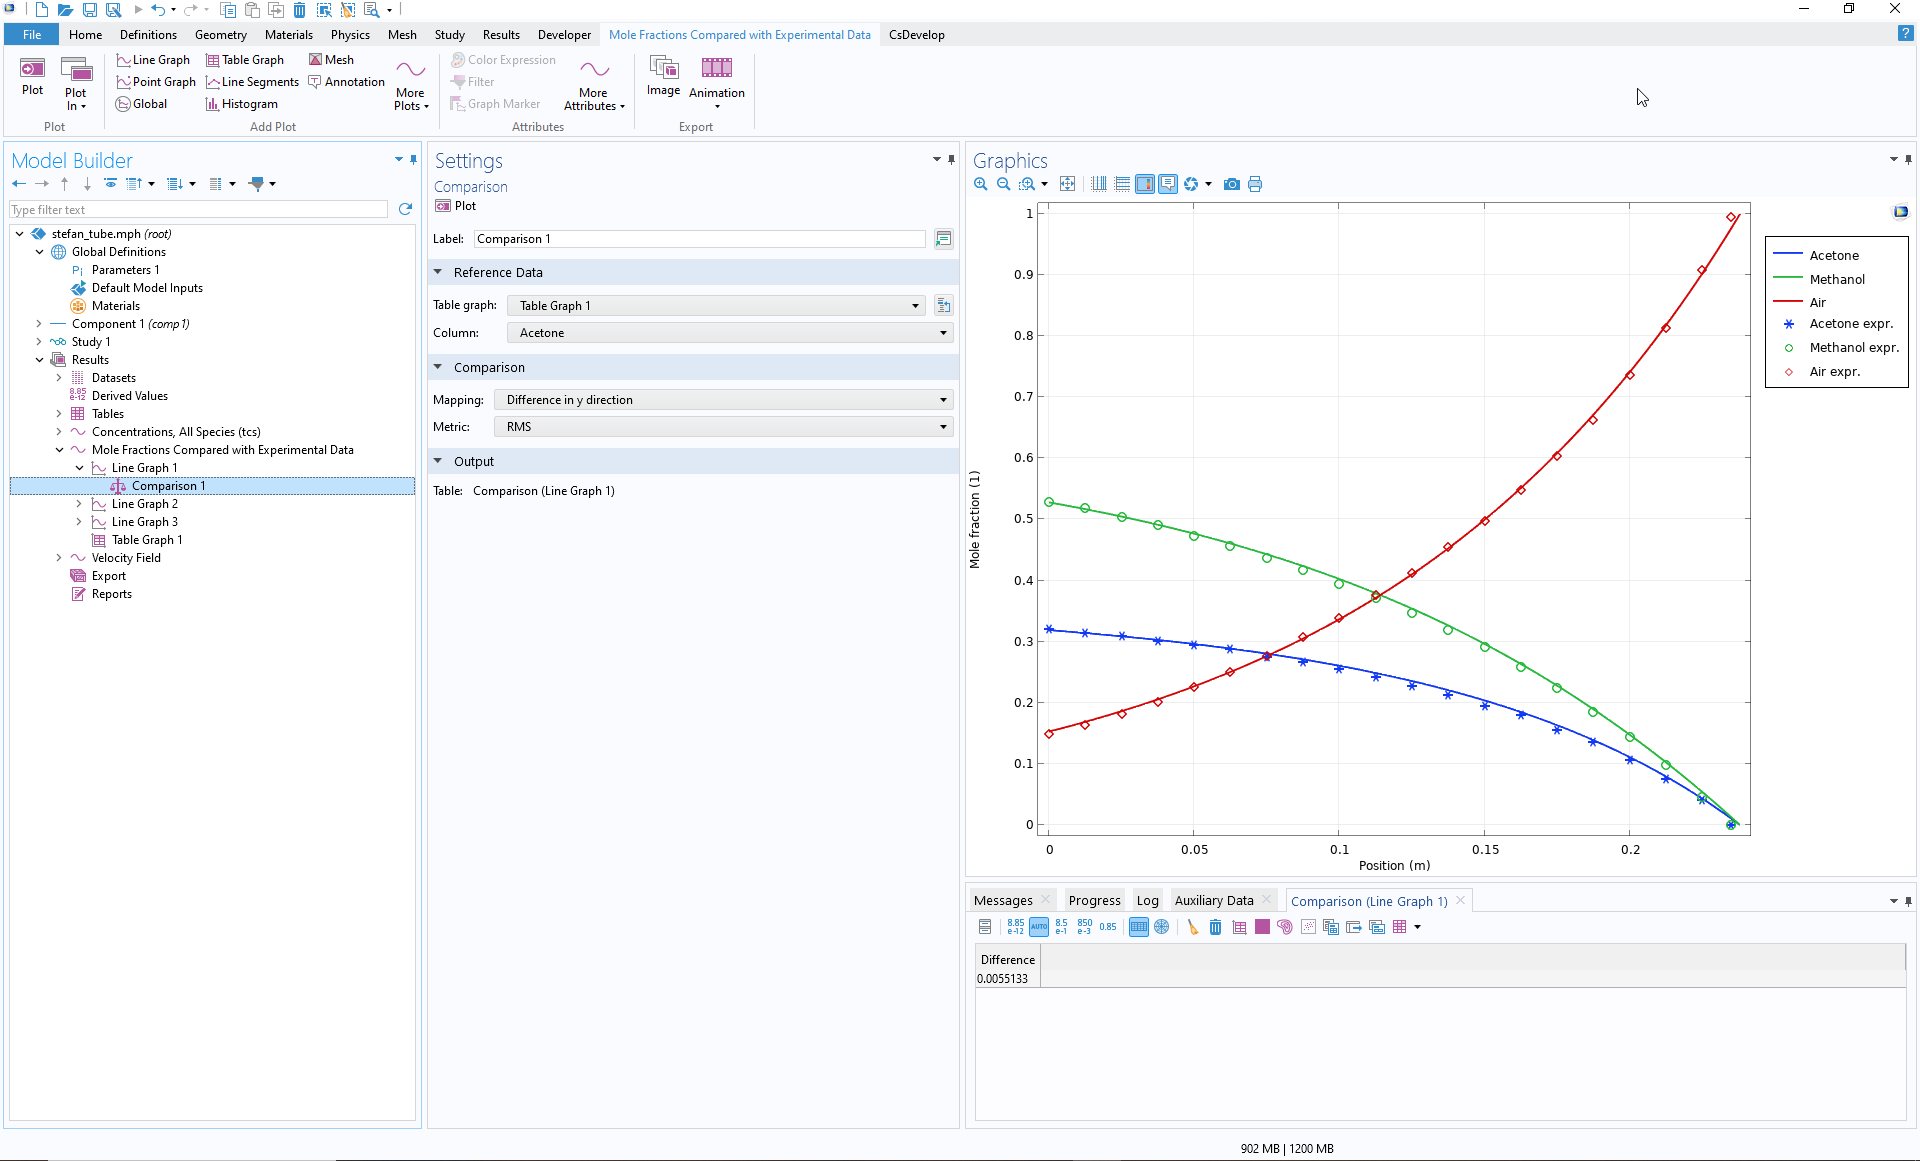 The COMSOL Multiphysics UI showing the Model Builder with a Comparison node highlighted, the corresponding Settings window, the Graphics window showing the plot comparison, and a table with the result of the comparison.